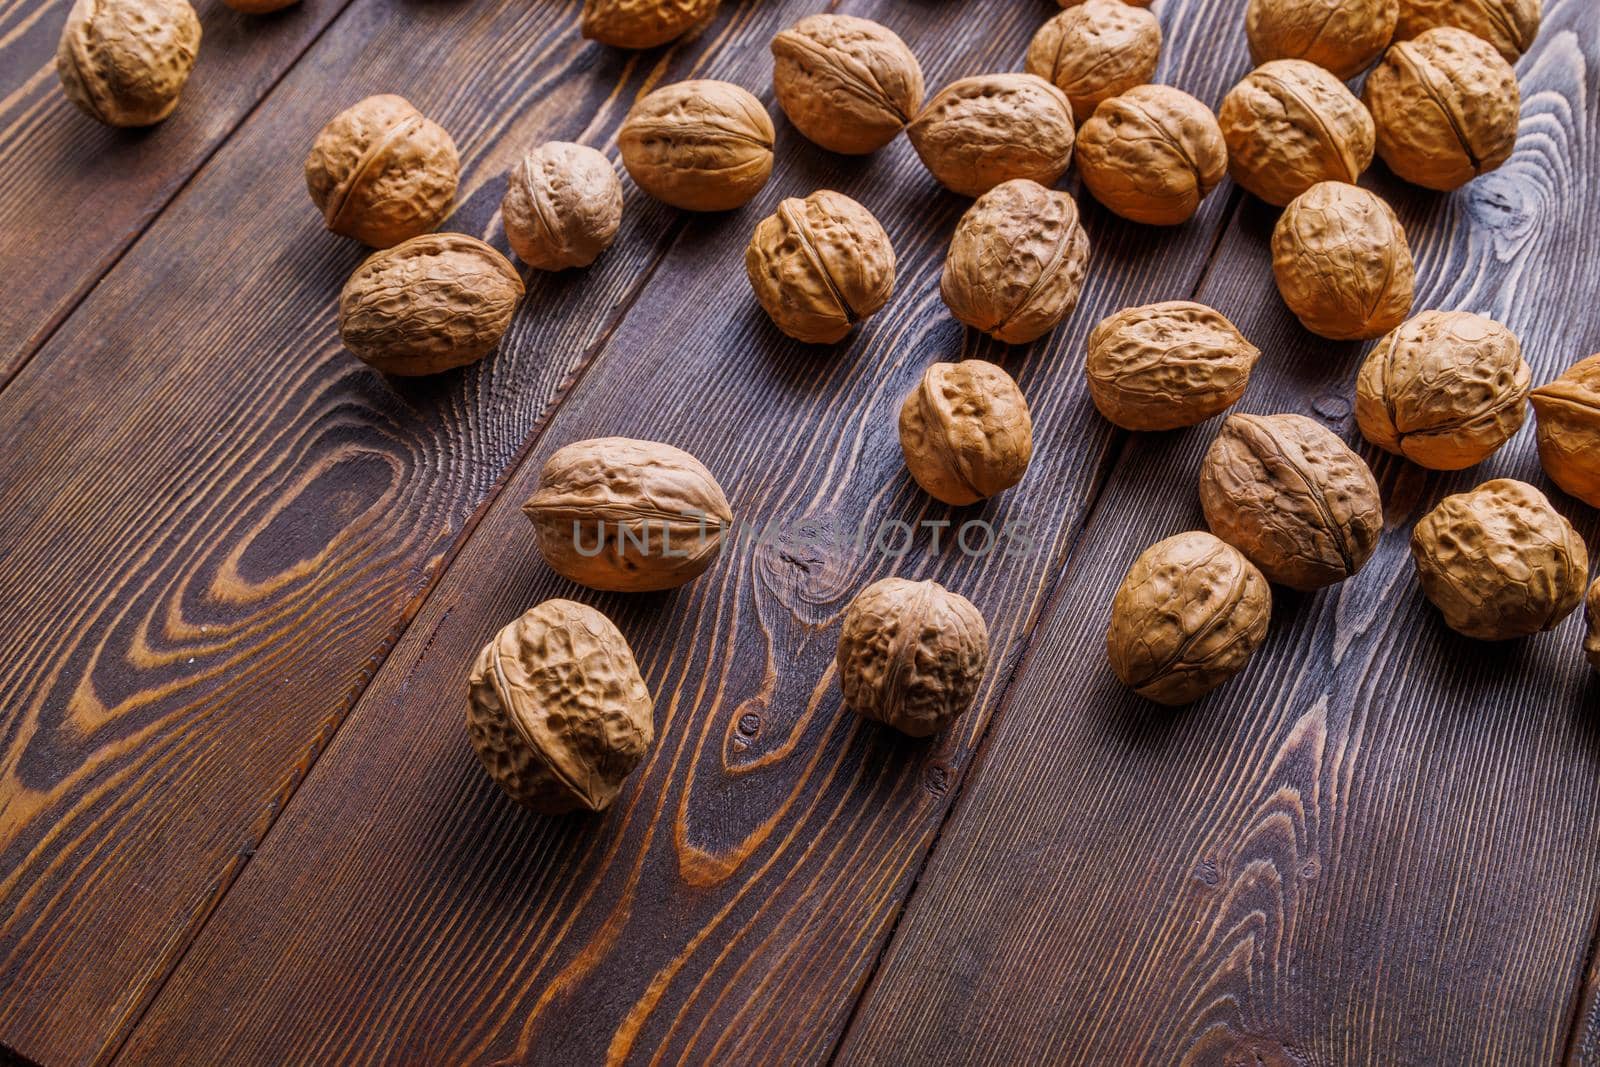 many walnuts with shells randomly scattered on brown wooden table surface, close-up perspective view with selective focus